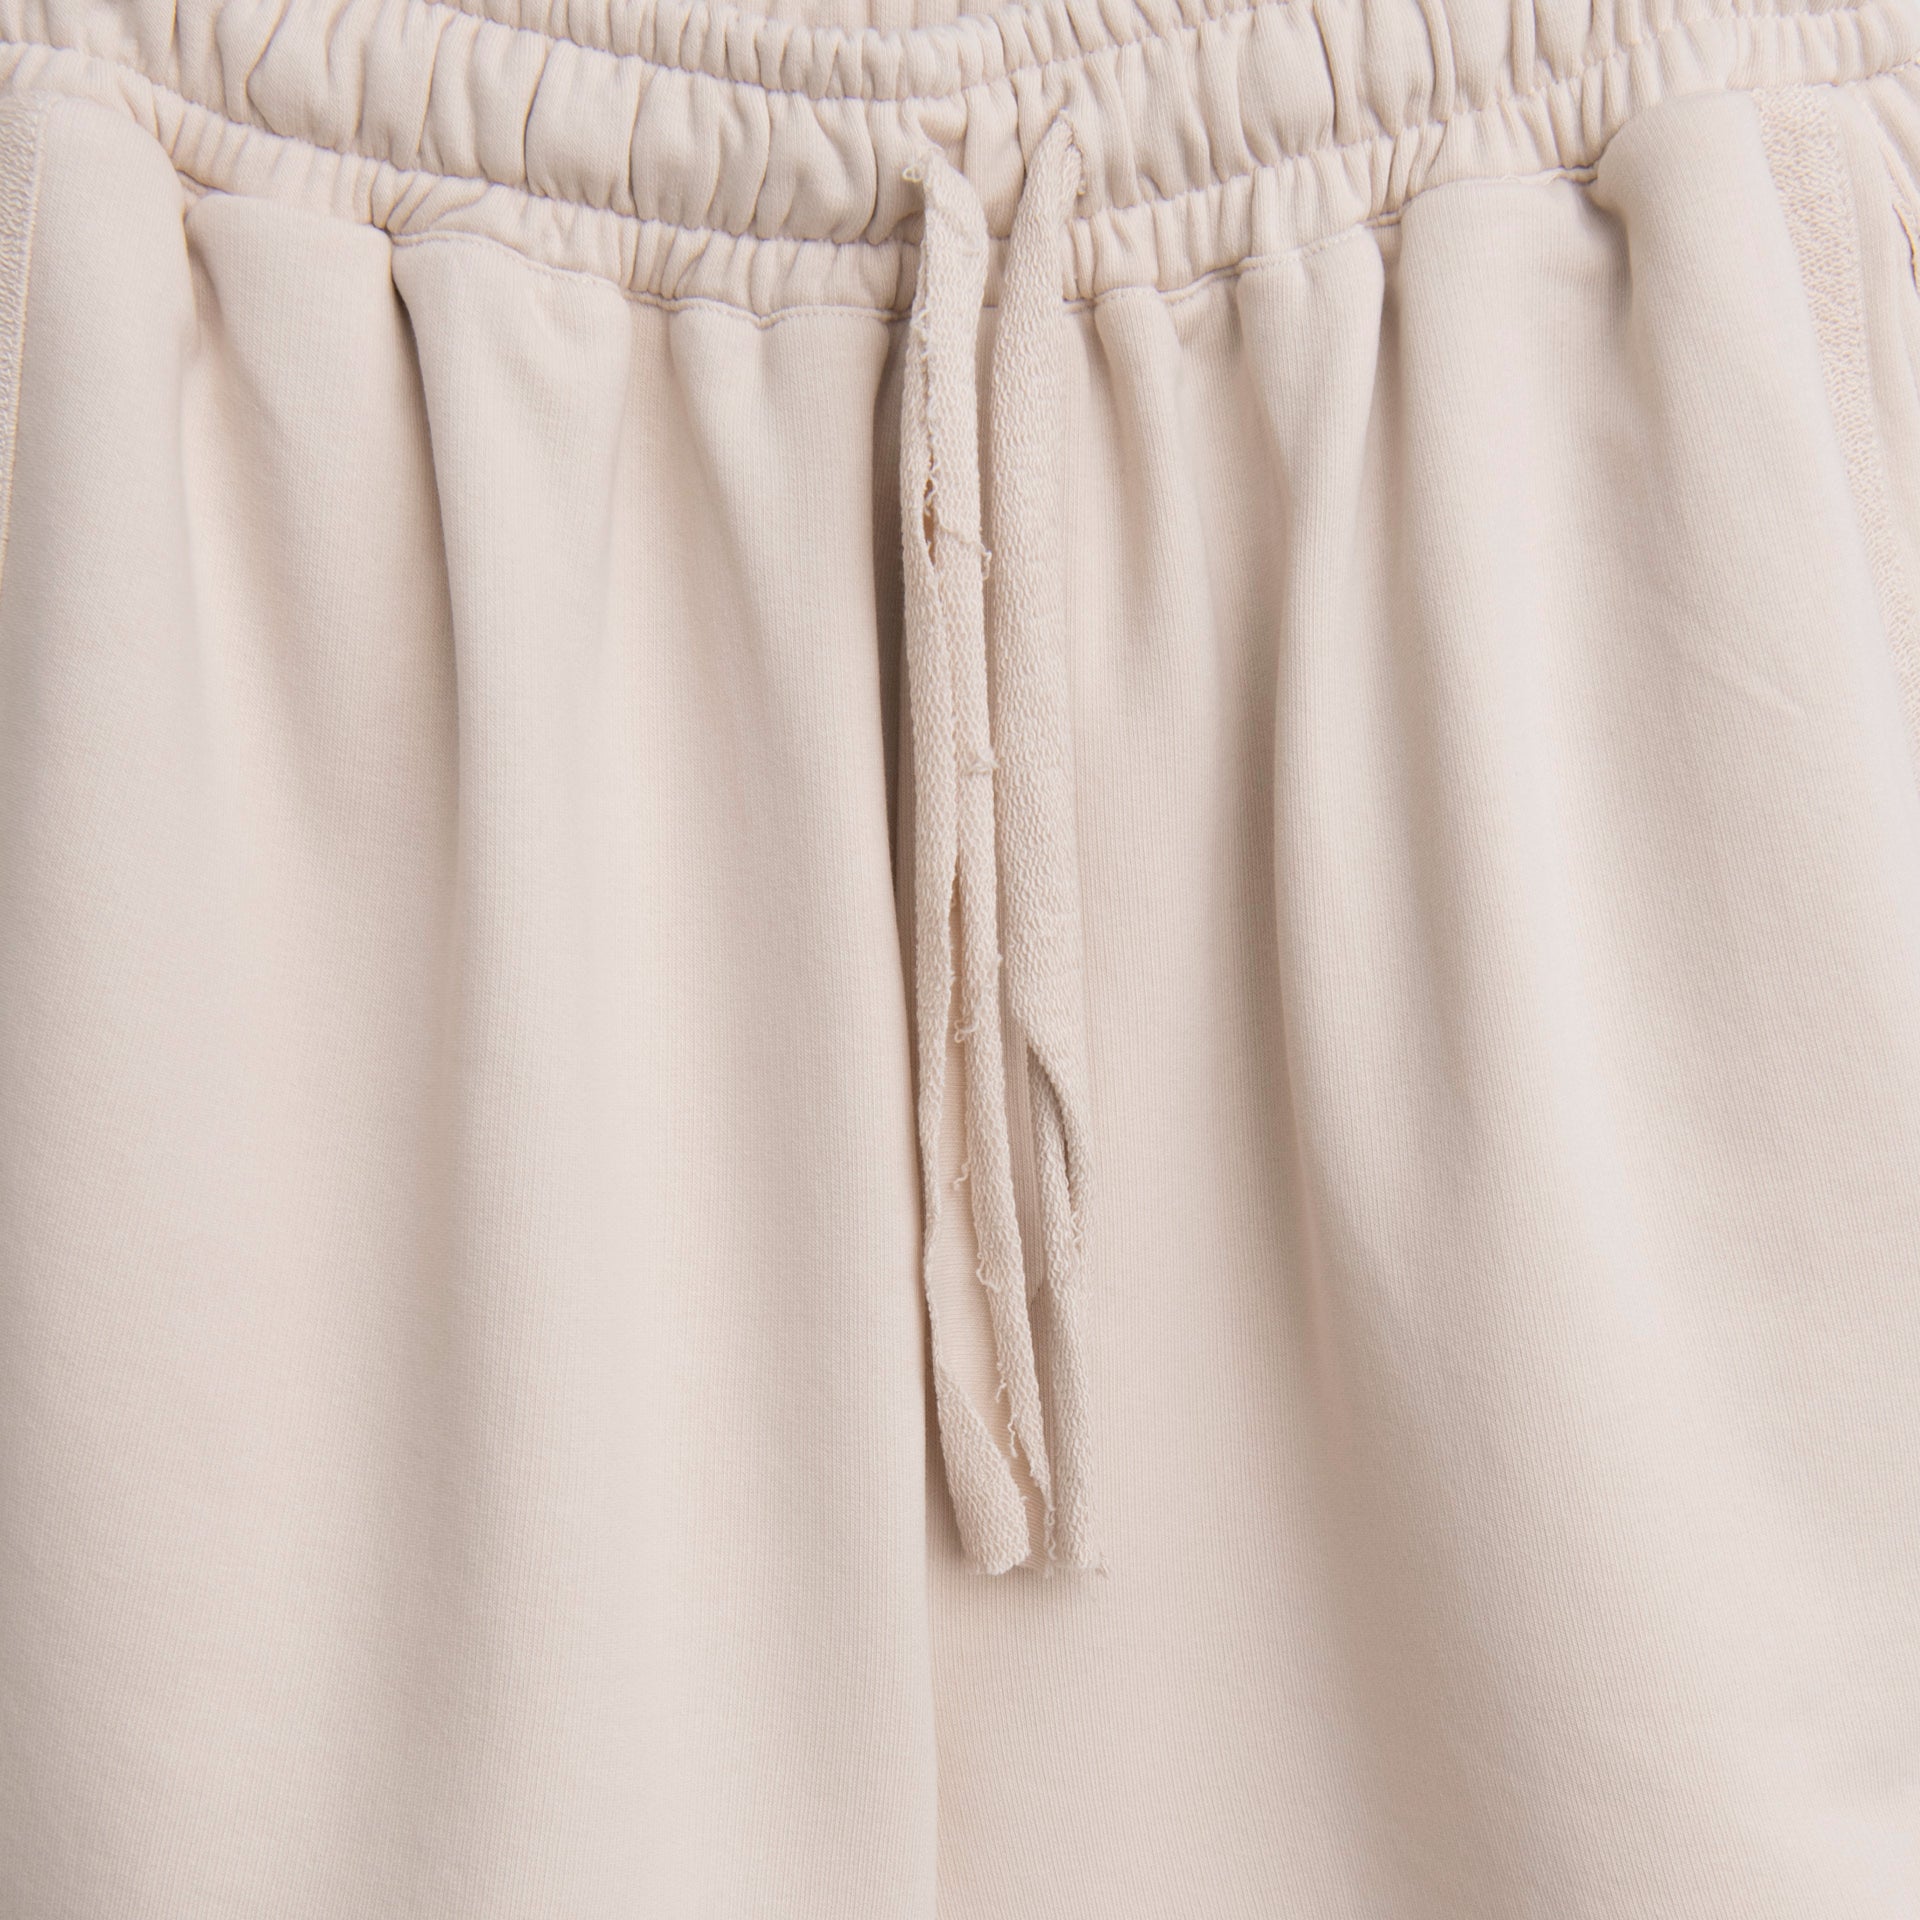 Light Beige Shorts With Stripes By S32